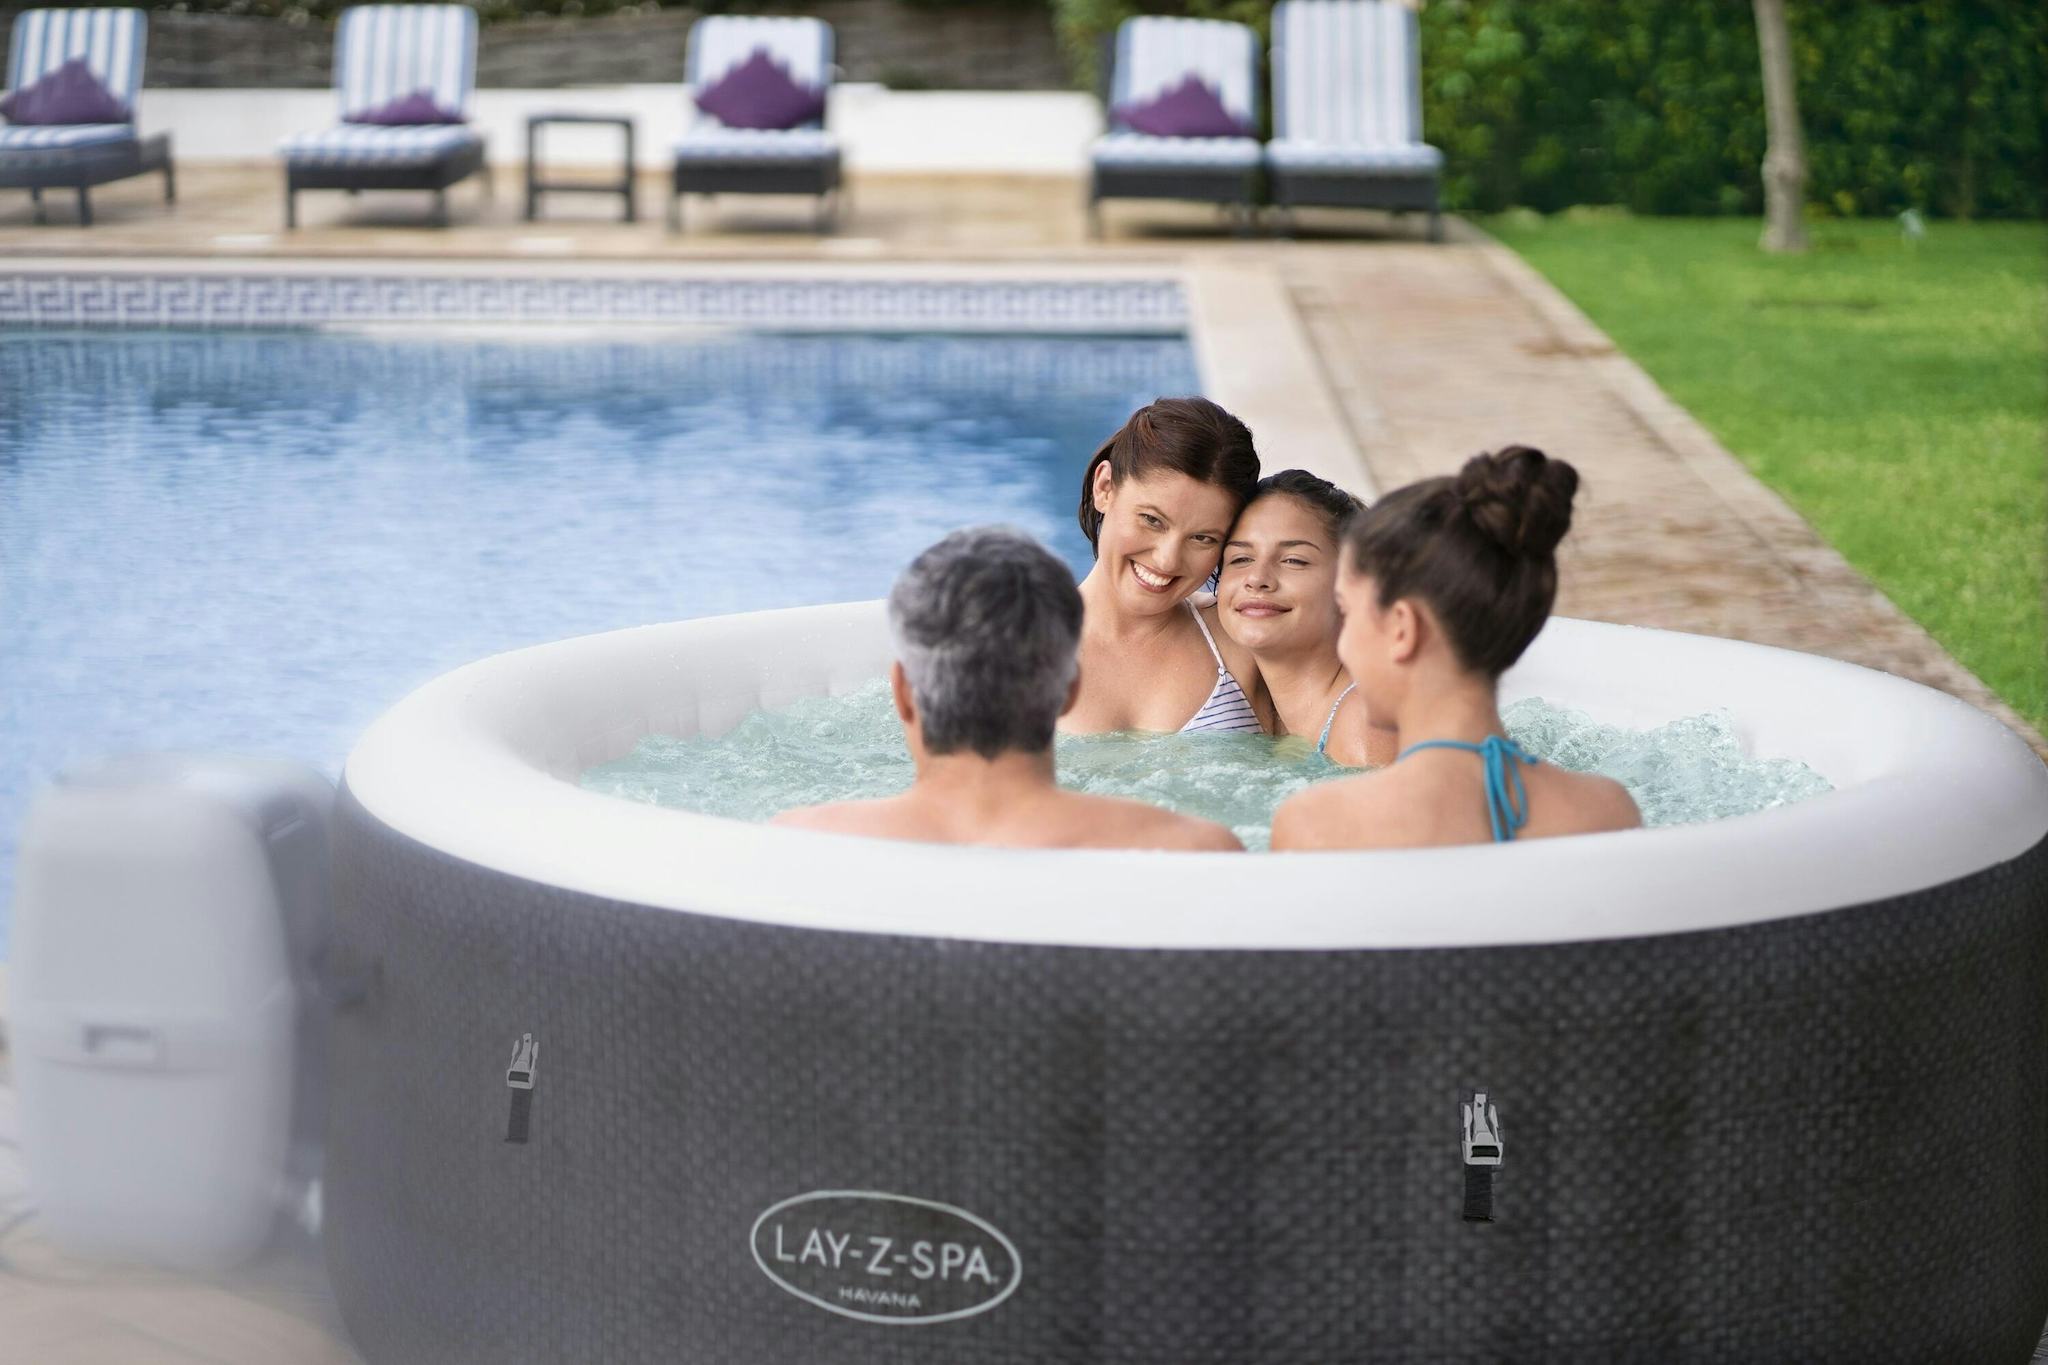 Spas Gonflables Spa gonflable rond Lay-Z-Spa Havana Airjet™ 2 - 4 personnes Bestway 14